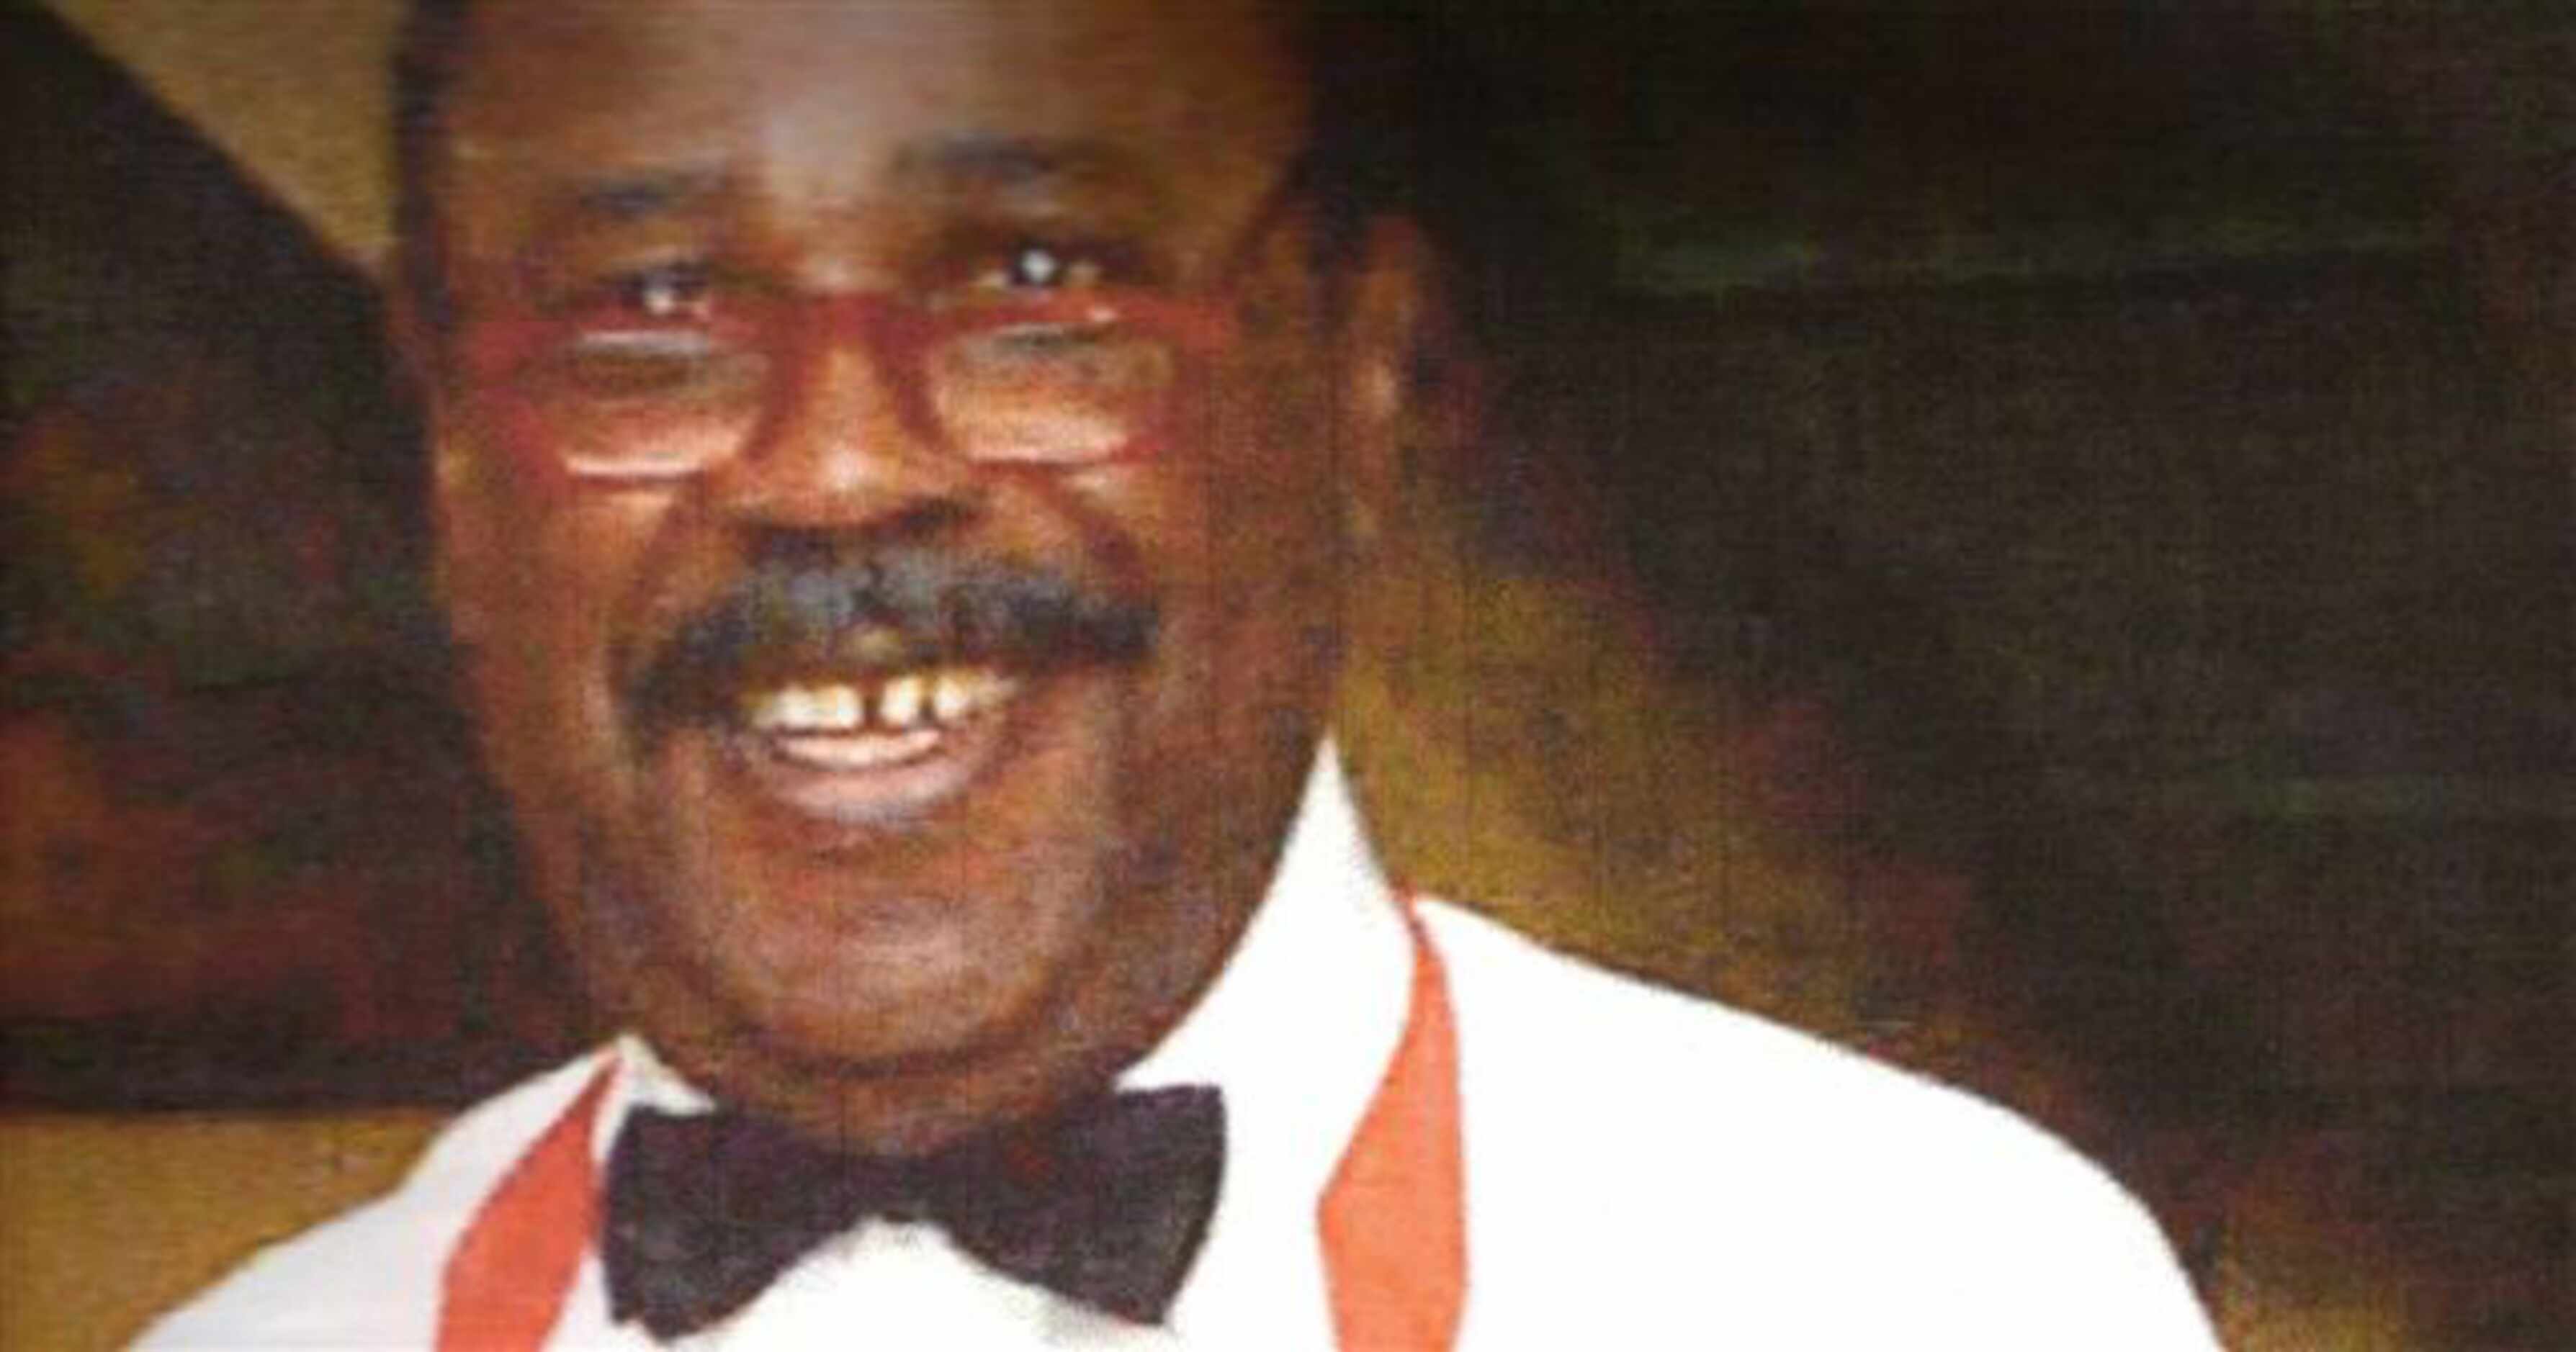 John Holliday worked as a waiter at S&D Oyster Company for 17 years. He died in 2007 and S&D...